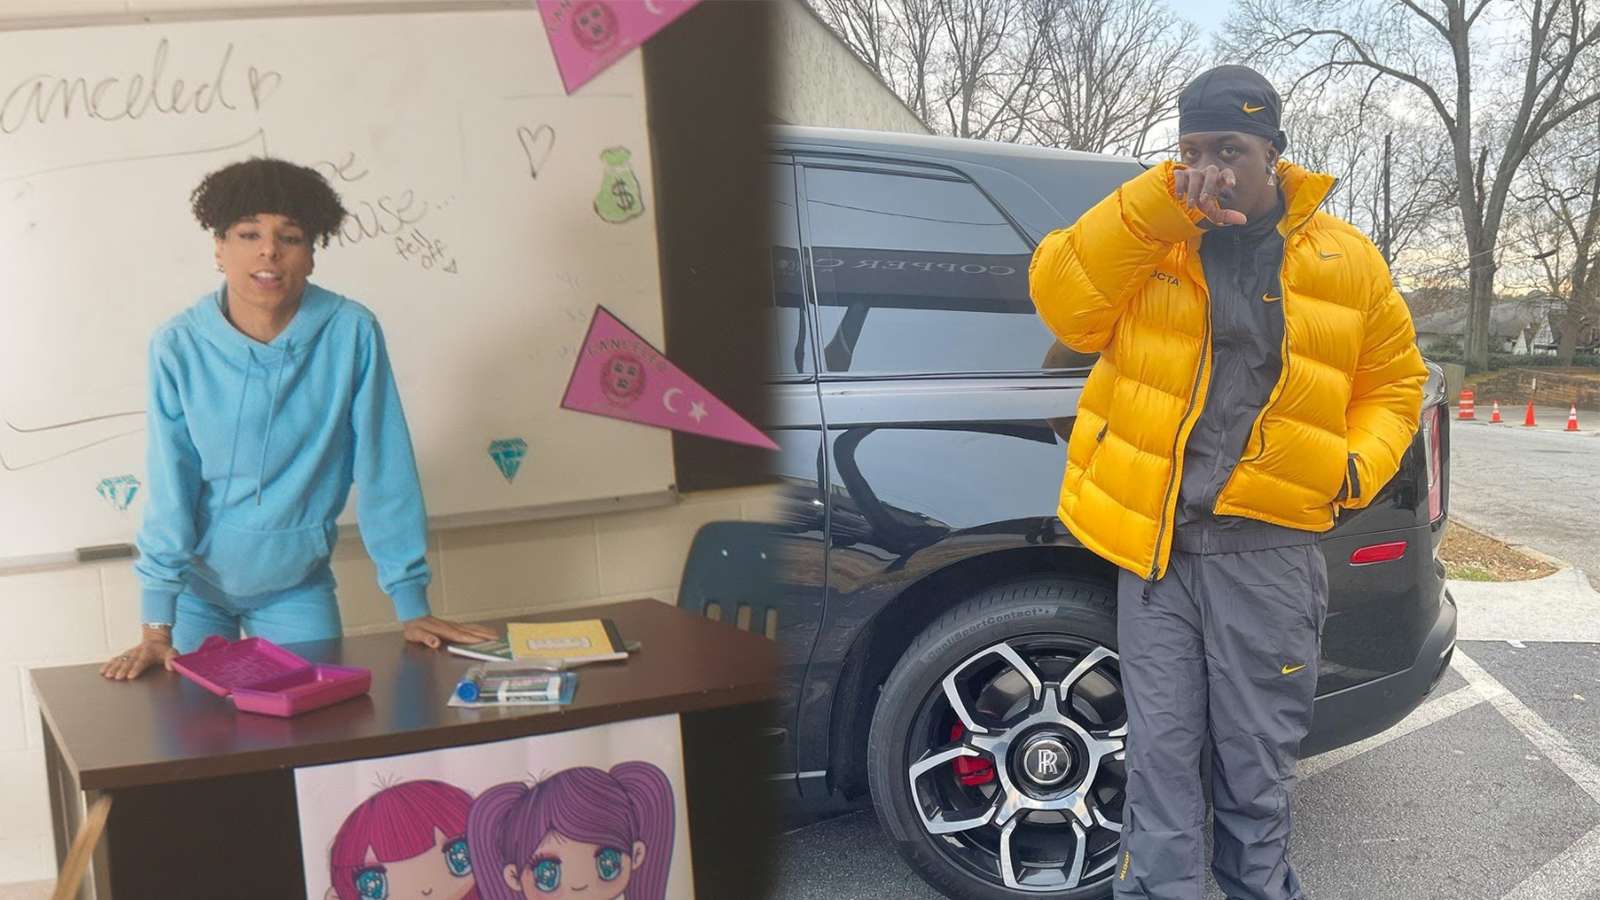 Lil Yachty poses in front of a black car, and Larray leans against a desk in a classroom